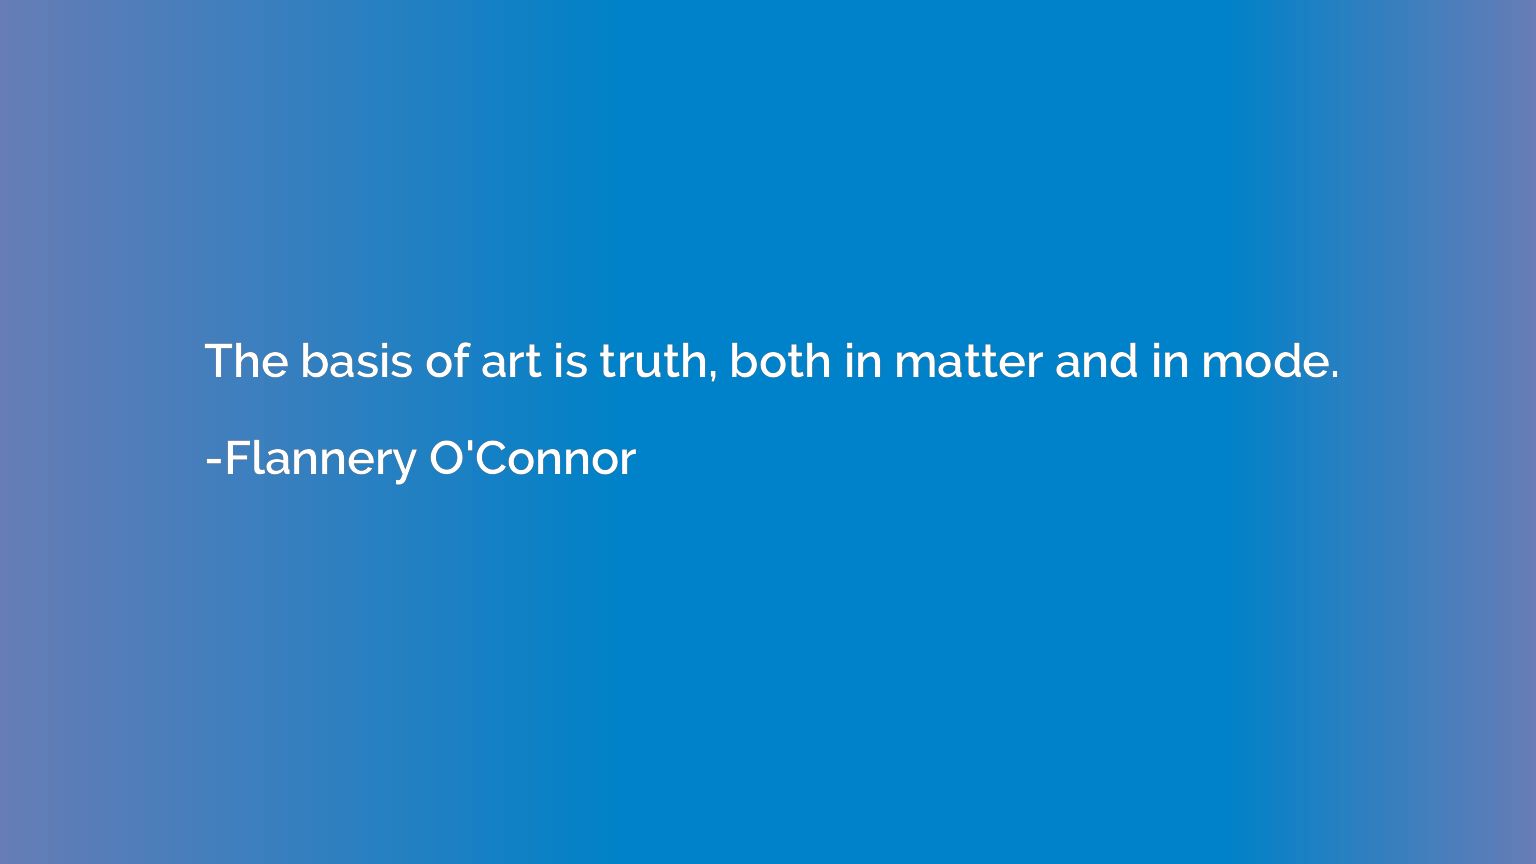 The basis of art is truth, both in matter and in mode.